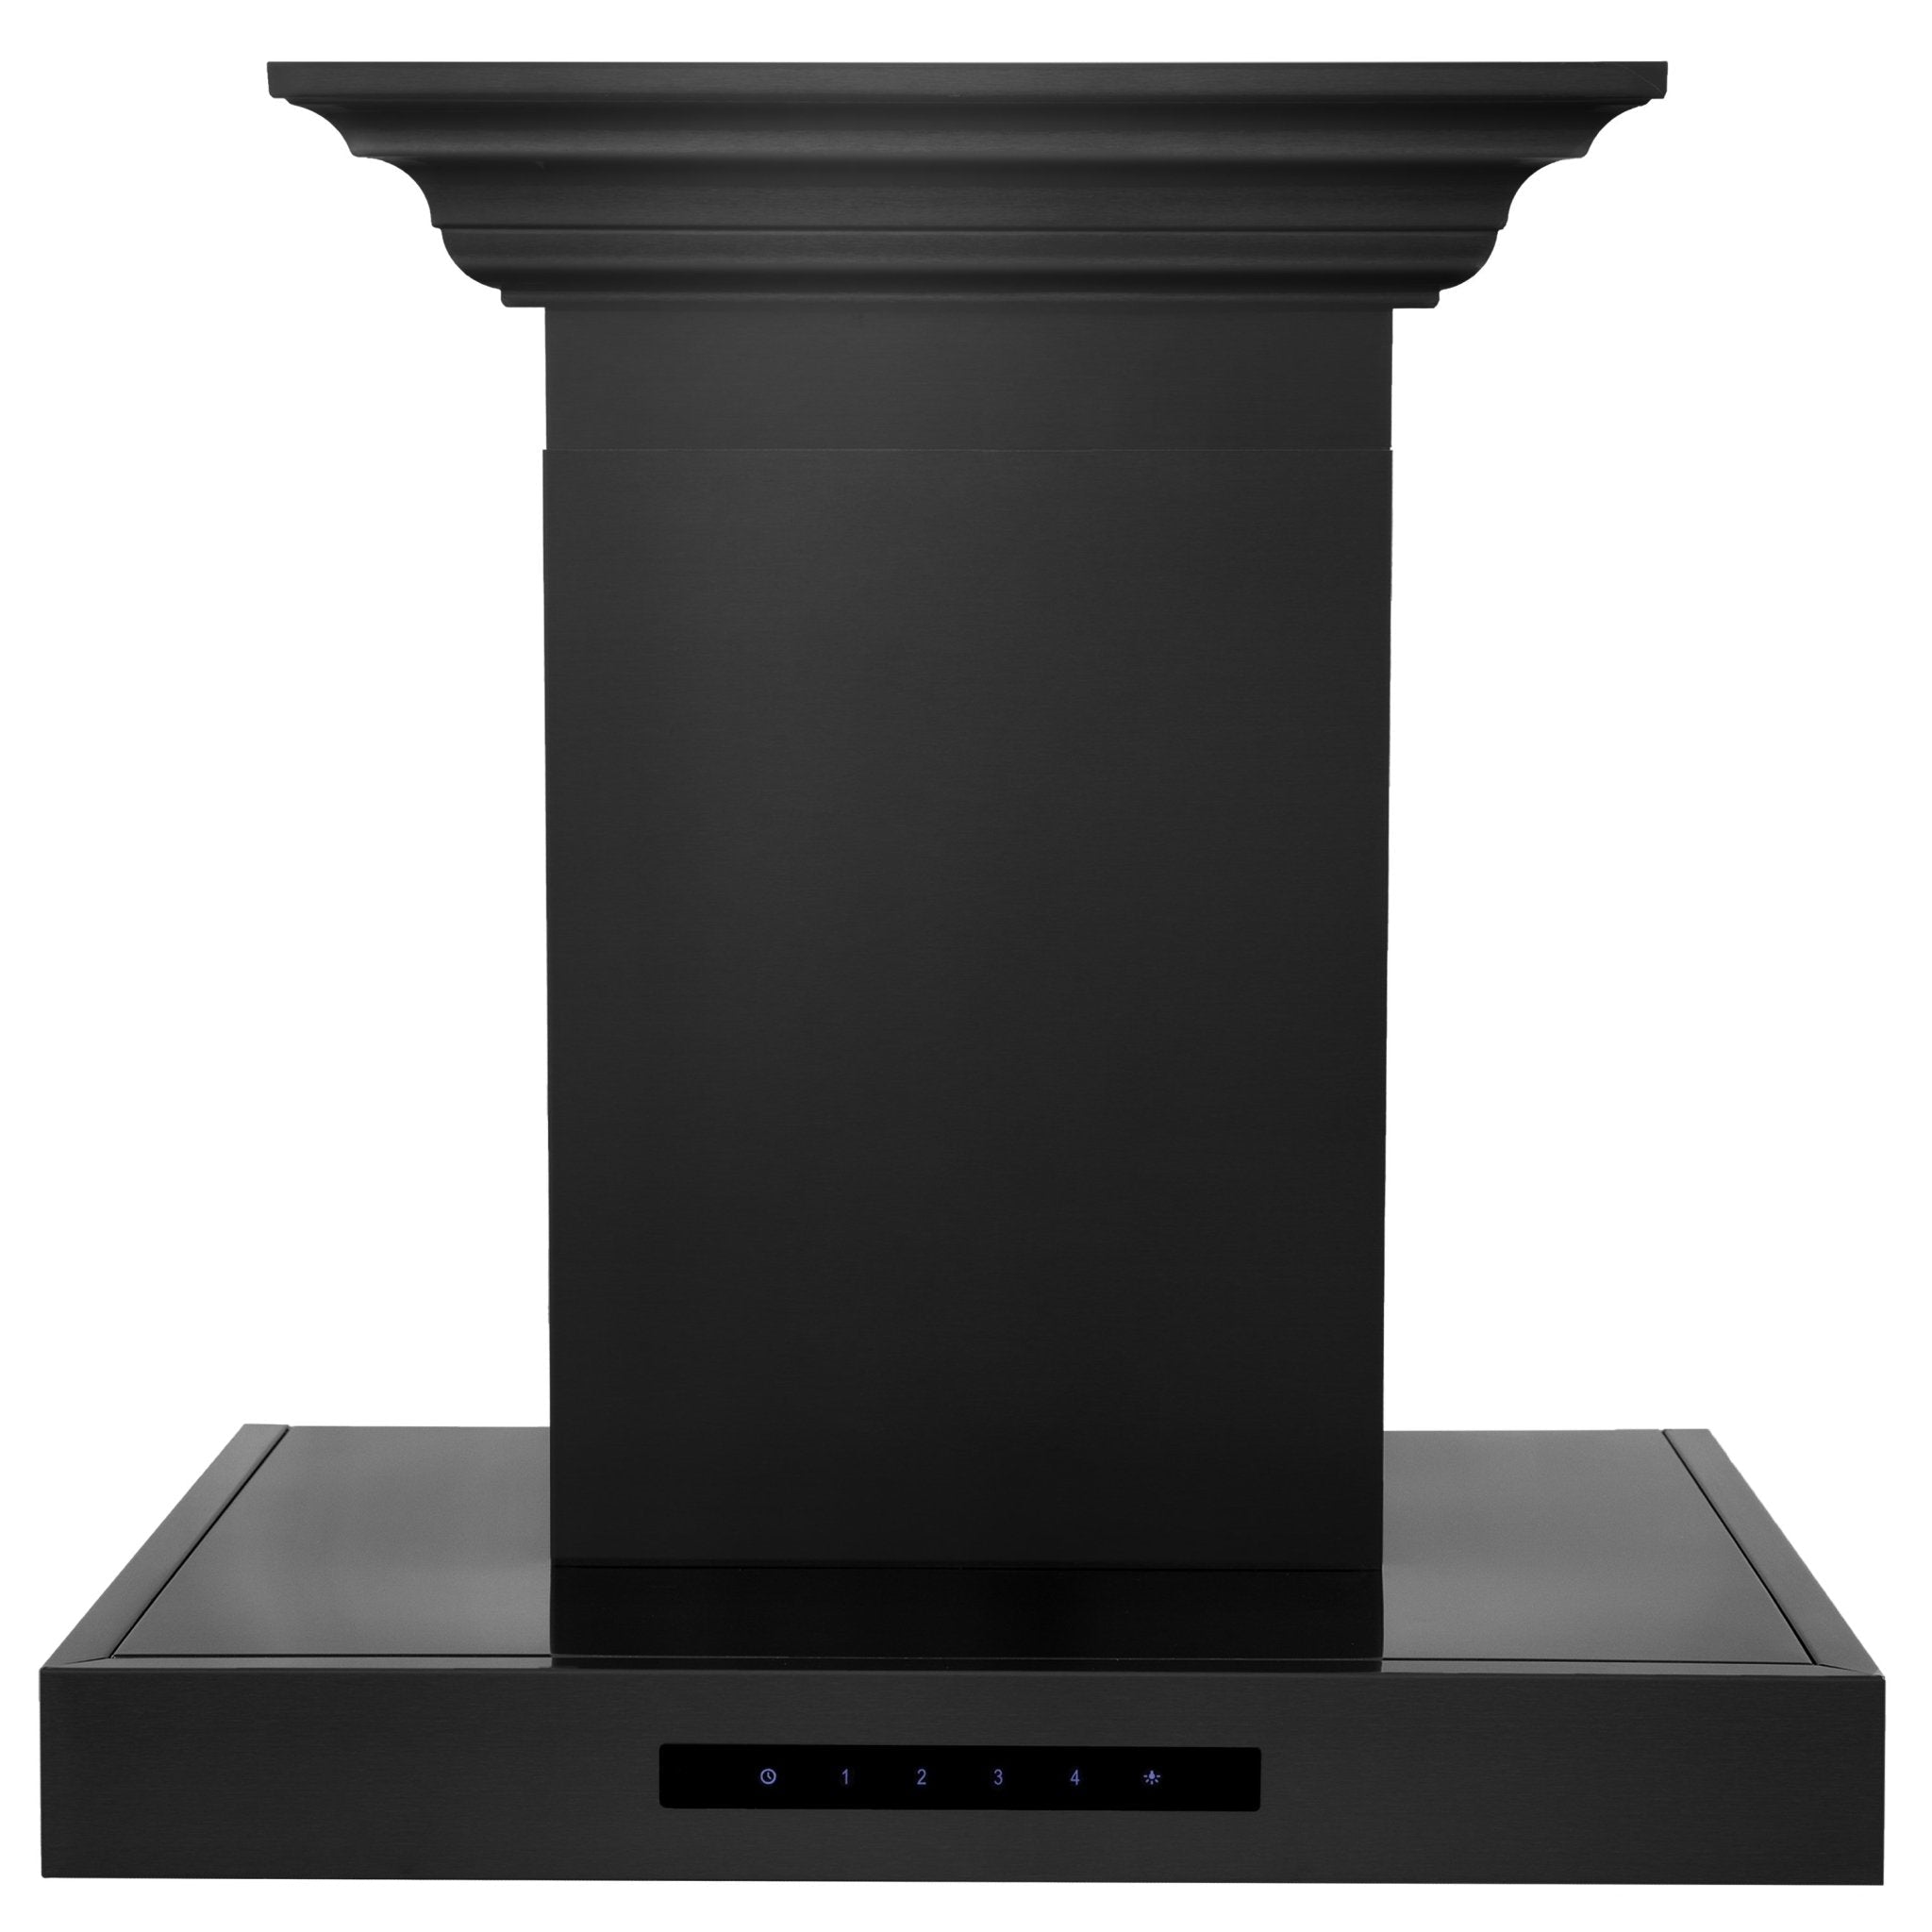 ZLINE Convertible Vent Wall Mount Range Hood in Black Stainless Steel with Crown Molding (BSKENCRN) front.